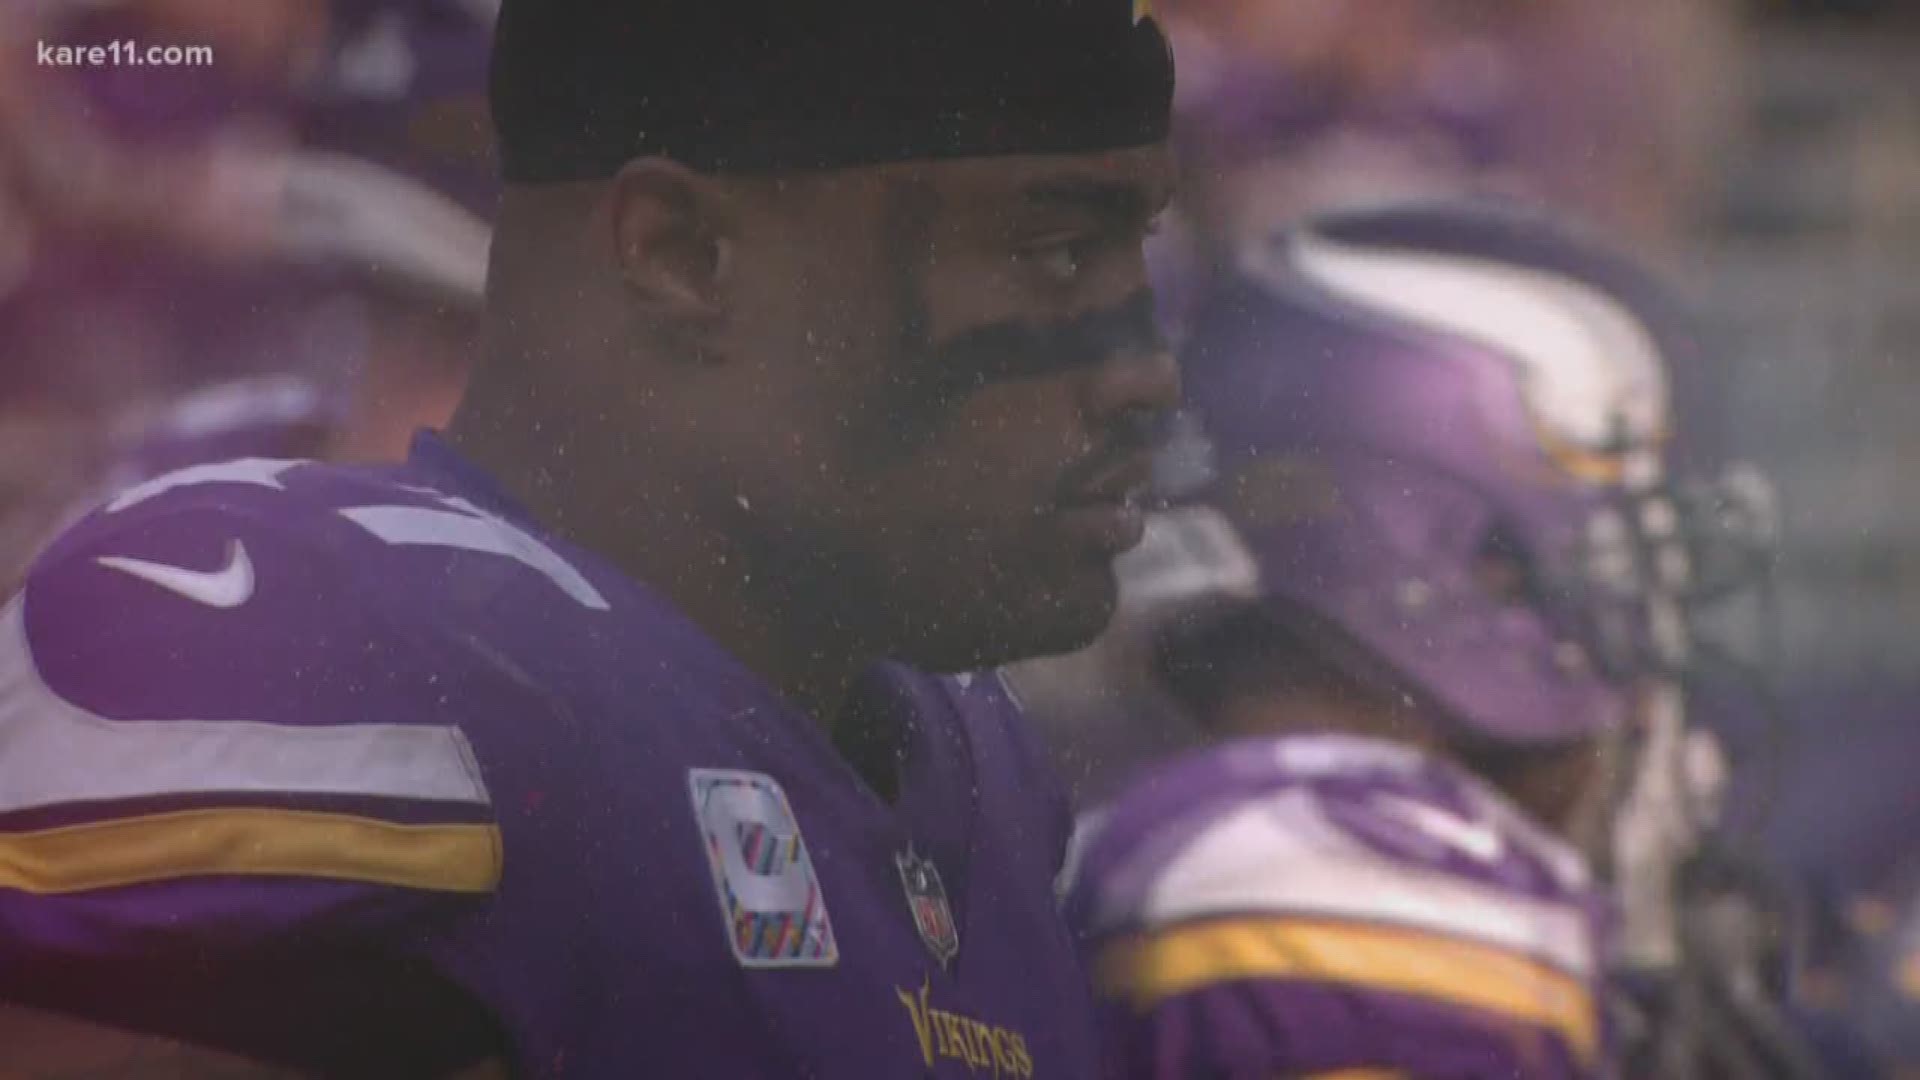 KFAN Power Trip morning show host Paul Lambert tweeted unapologetically that Vikings fans should pipe down about football and focus on what matters, Everson Griffen's health and the well being of his family. https://kare11.tv/2xMUtDW